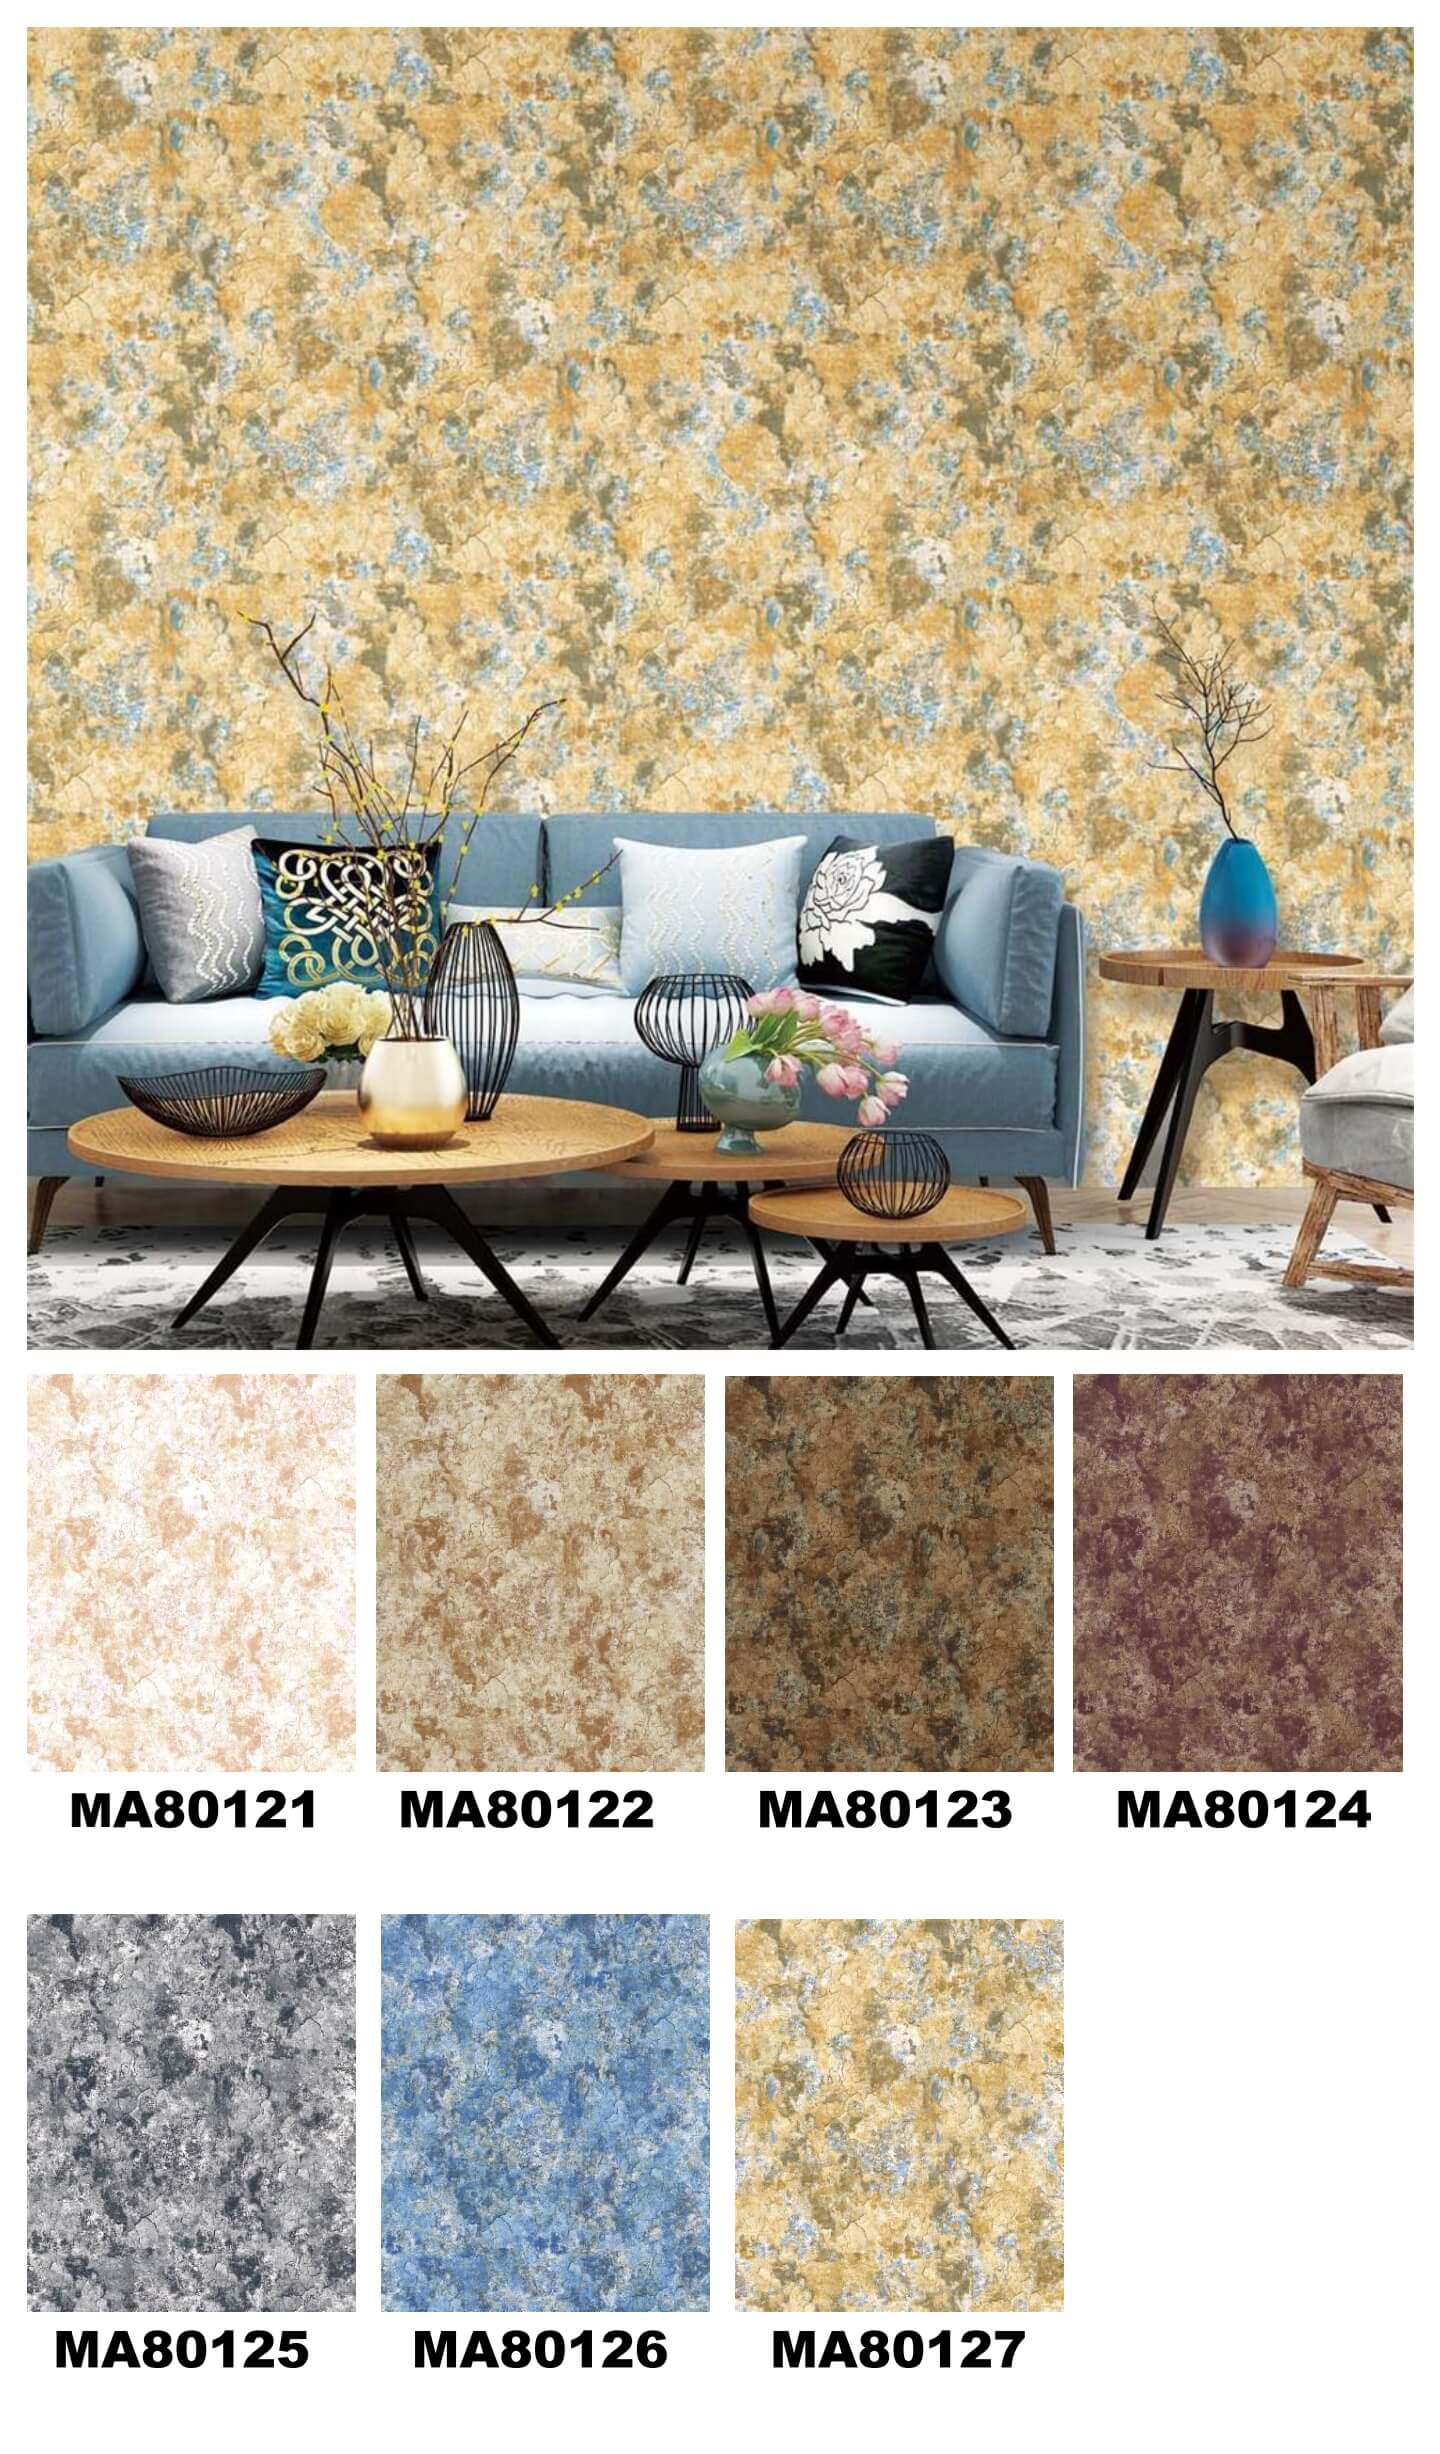 Beautiful Color 3D Design Wallpaper Better choice For Living Area, Bedroom, kids room, Office Durable PVC Wallpapers (6)